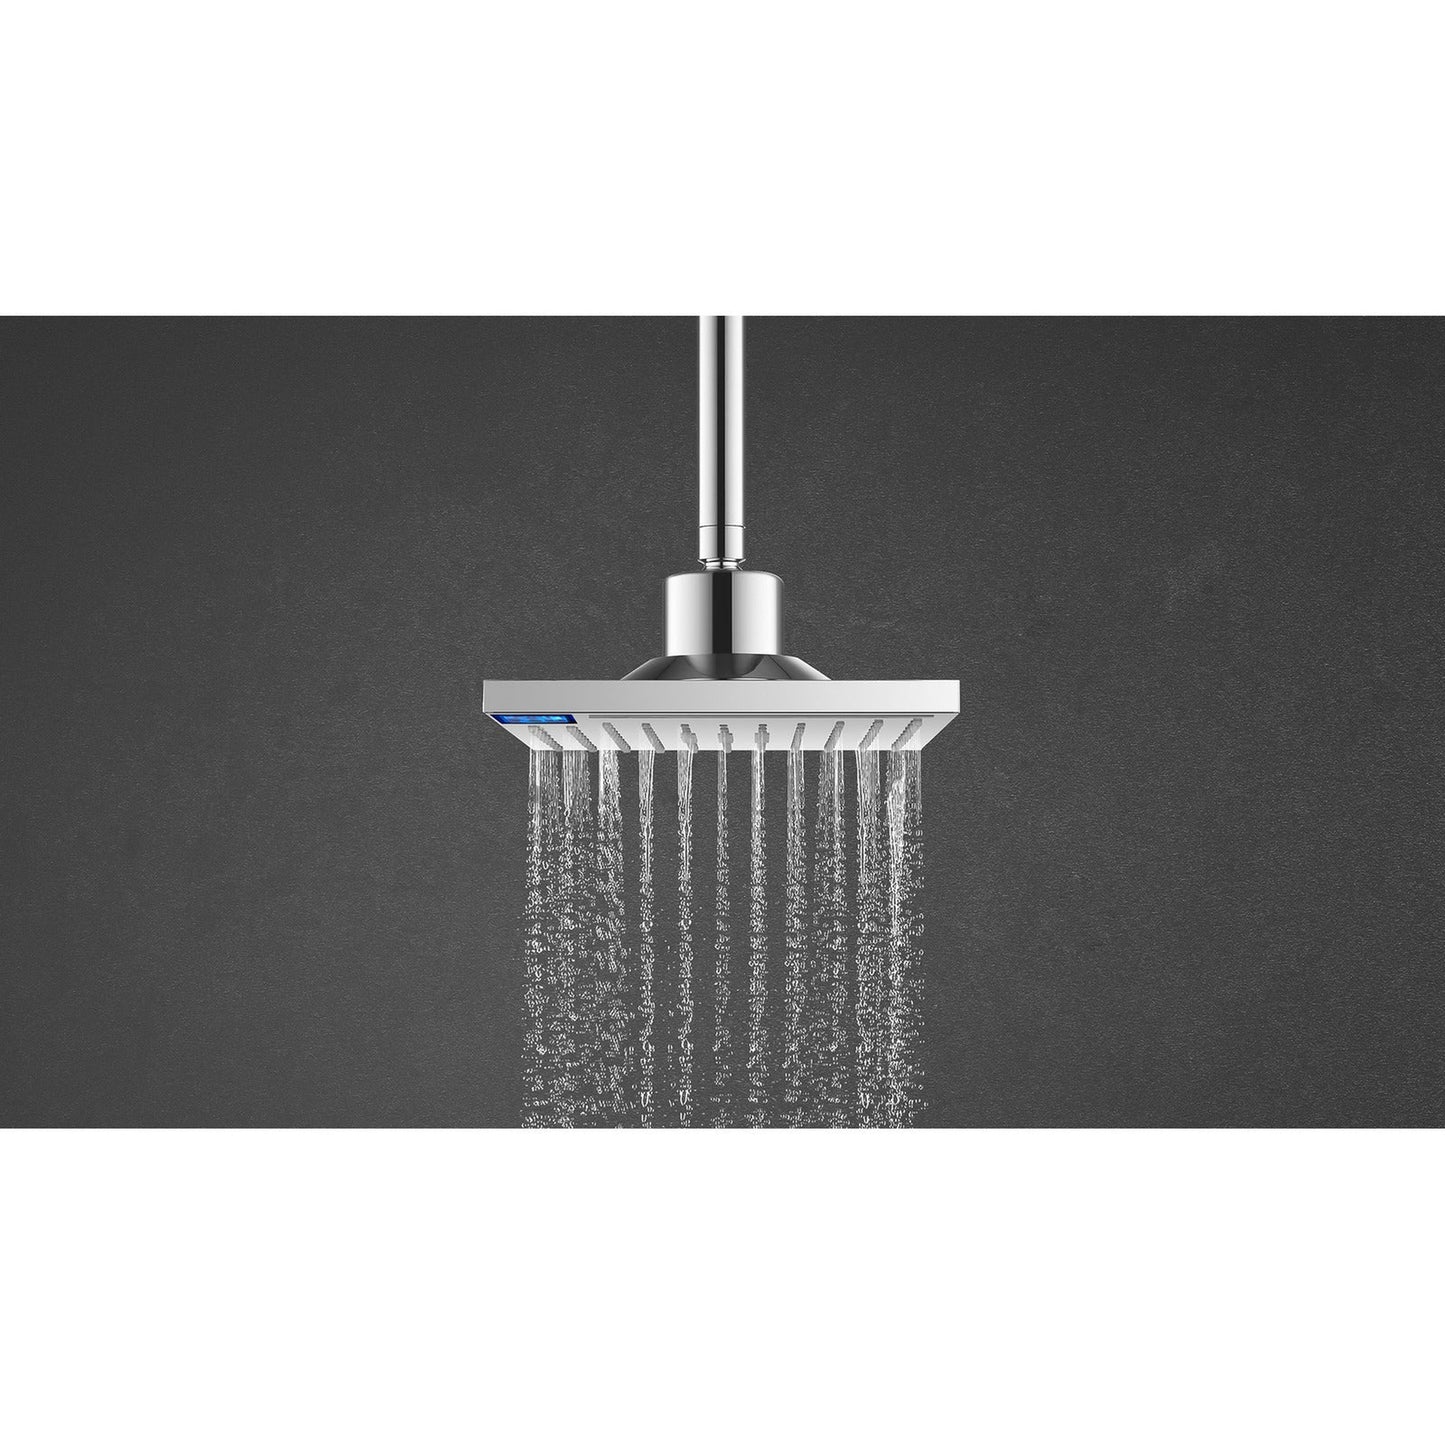 Evekare Chrome Plated Square Shower Head With LED Temperature Display